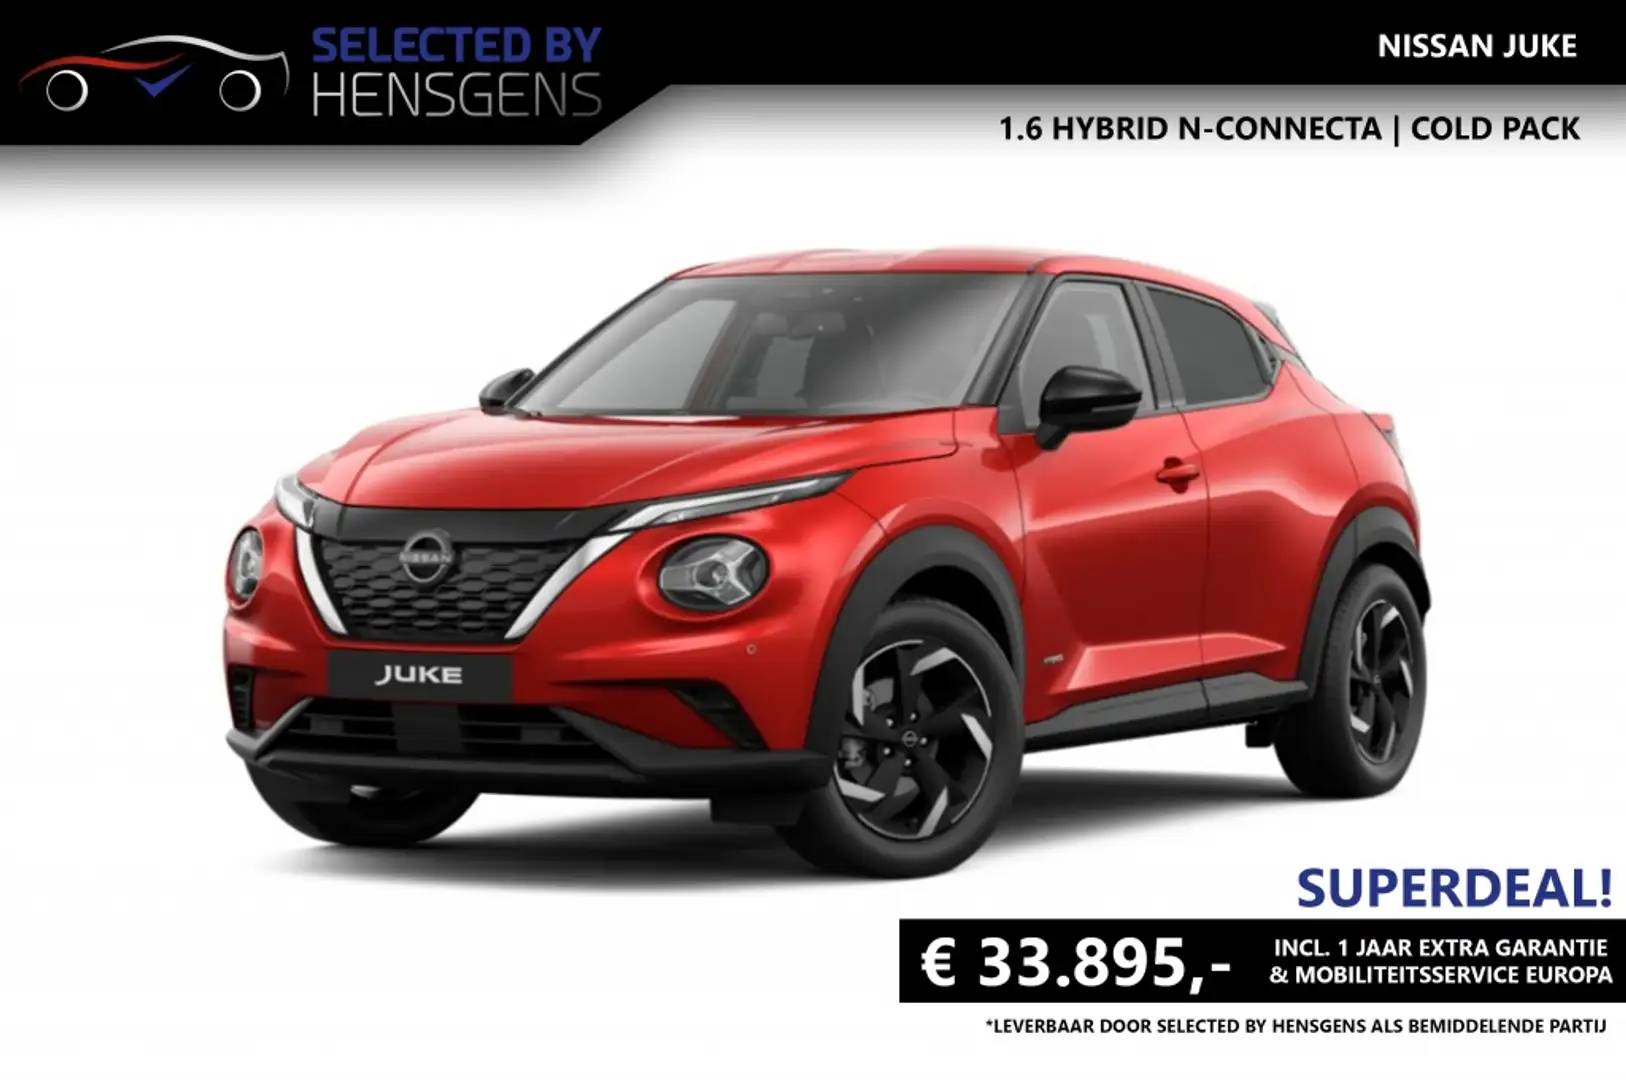 Nissan Juke 1.6 Hyb. N-Connecta | Cold Pack Red - 1